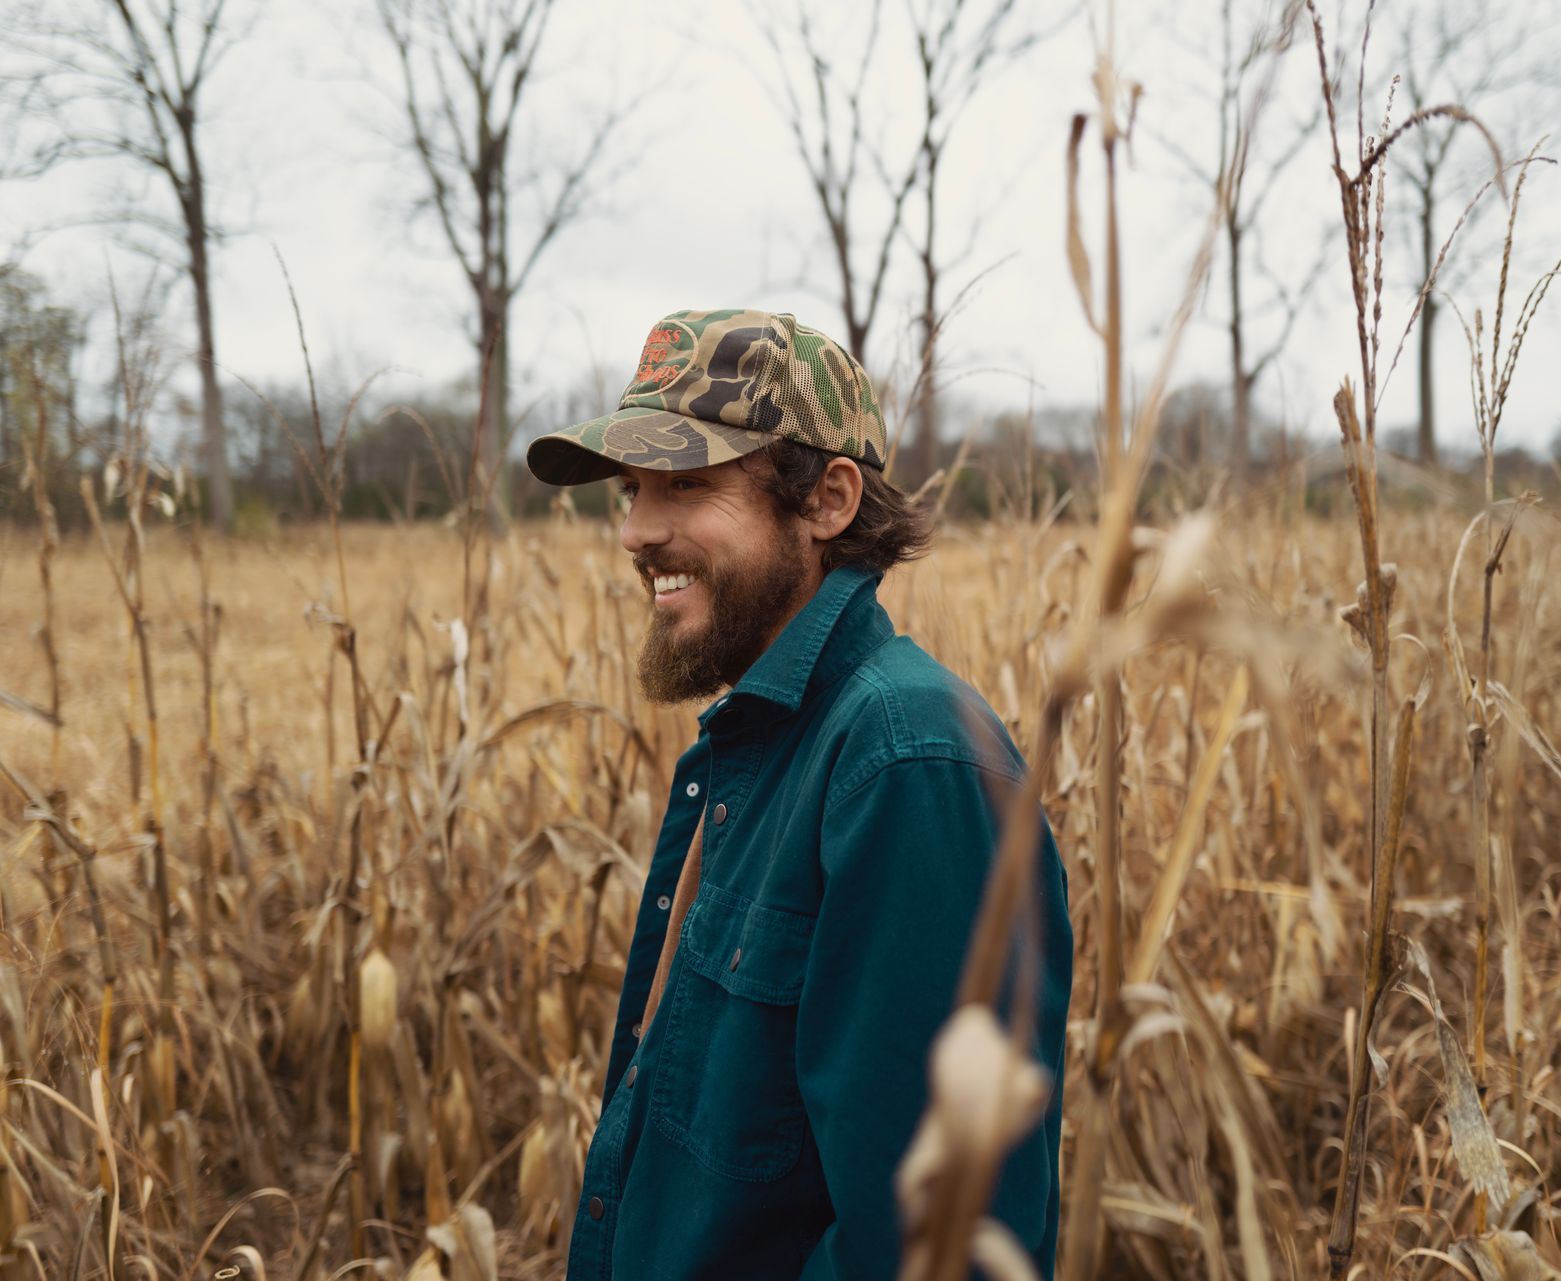 A man with a beard is standing in a field of tall grass.